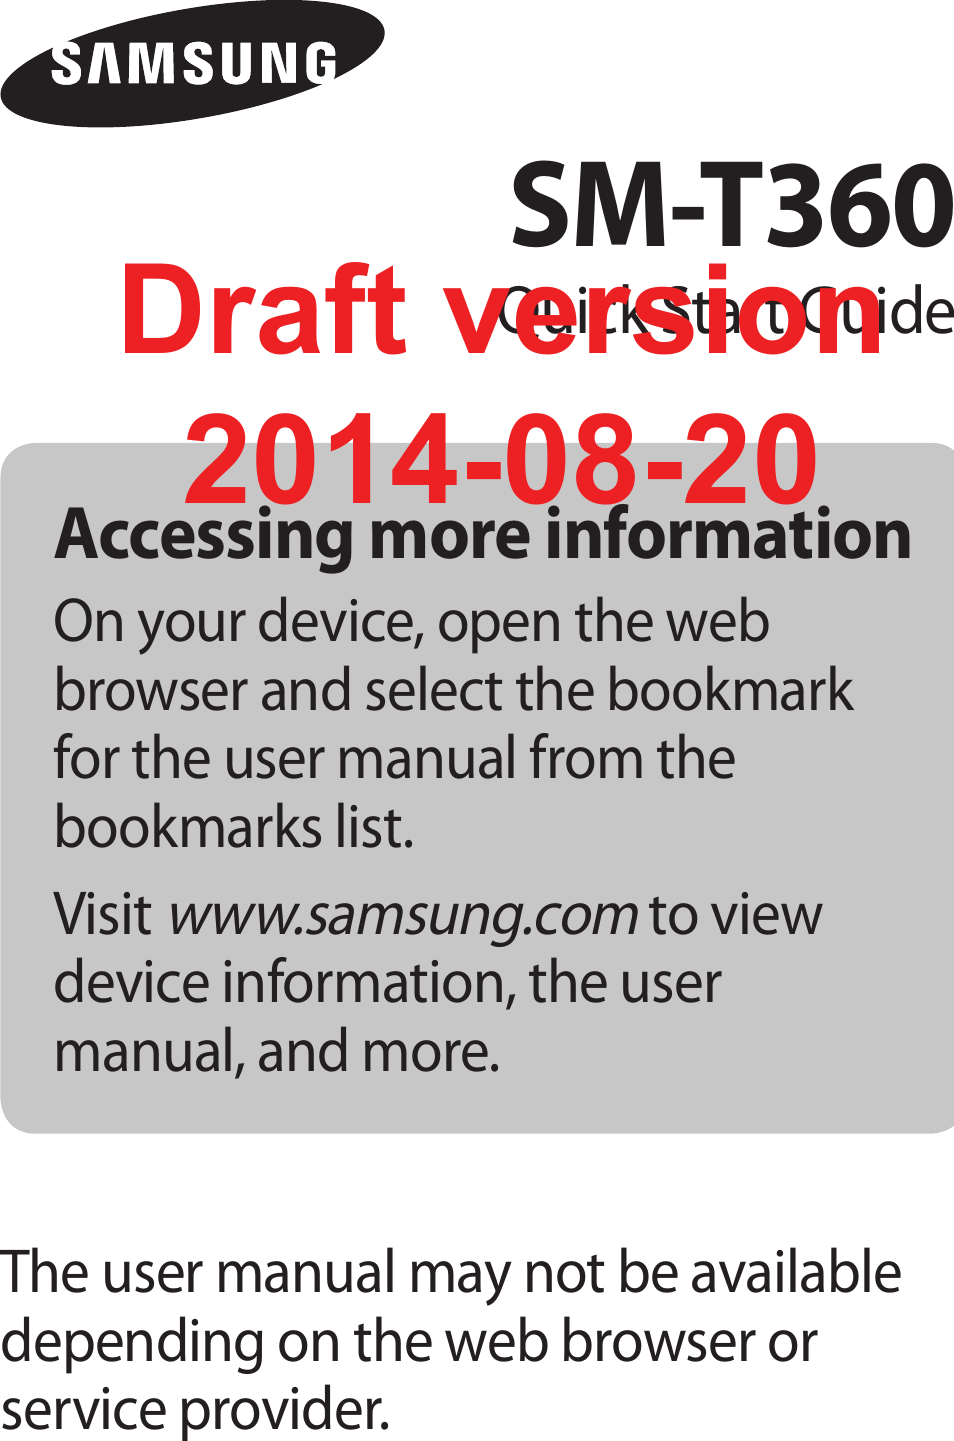 Accessing more informationOn your device, open the web browser and select the bookmark for the user manual from the bookmarks list.Visit www.samsung.com to view device information, the user manual, and more.The user manual may not be available depending on the web browser or service provider.SM-T360Quick Start GuideDraft version2014-08-20